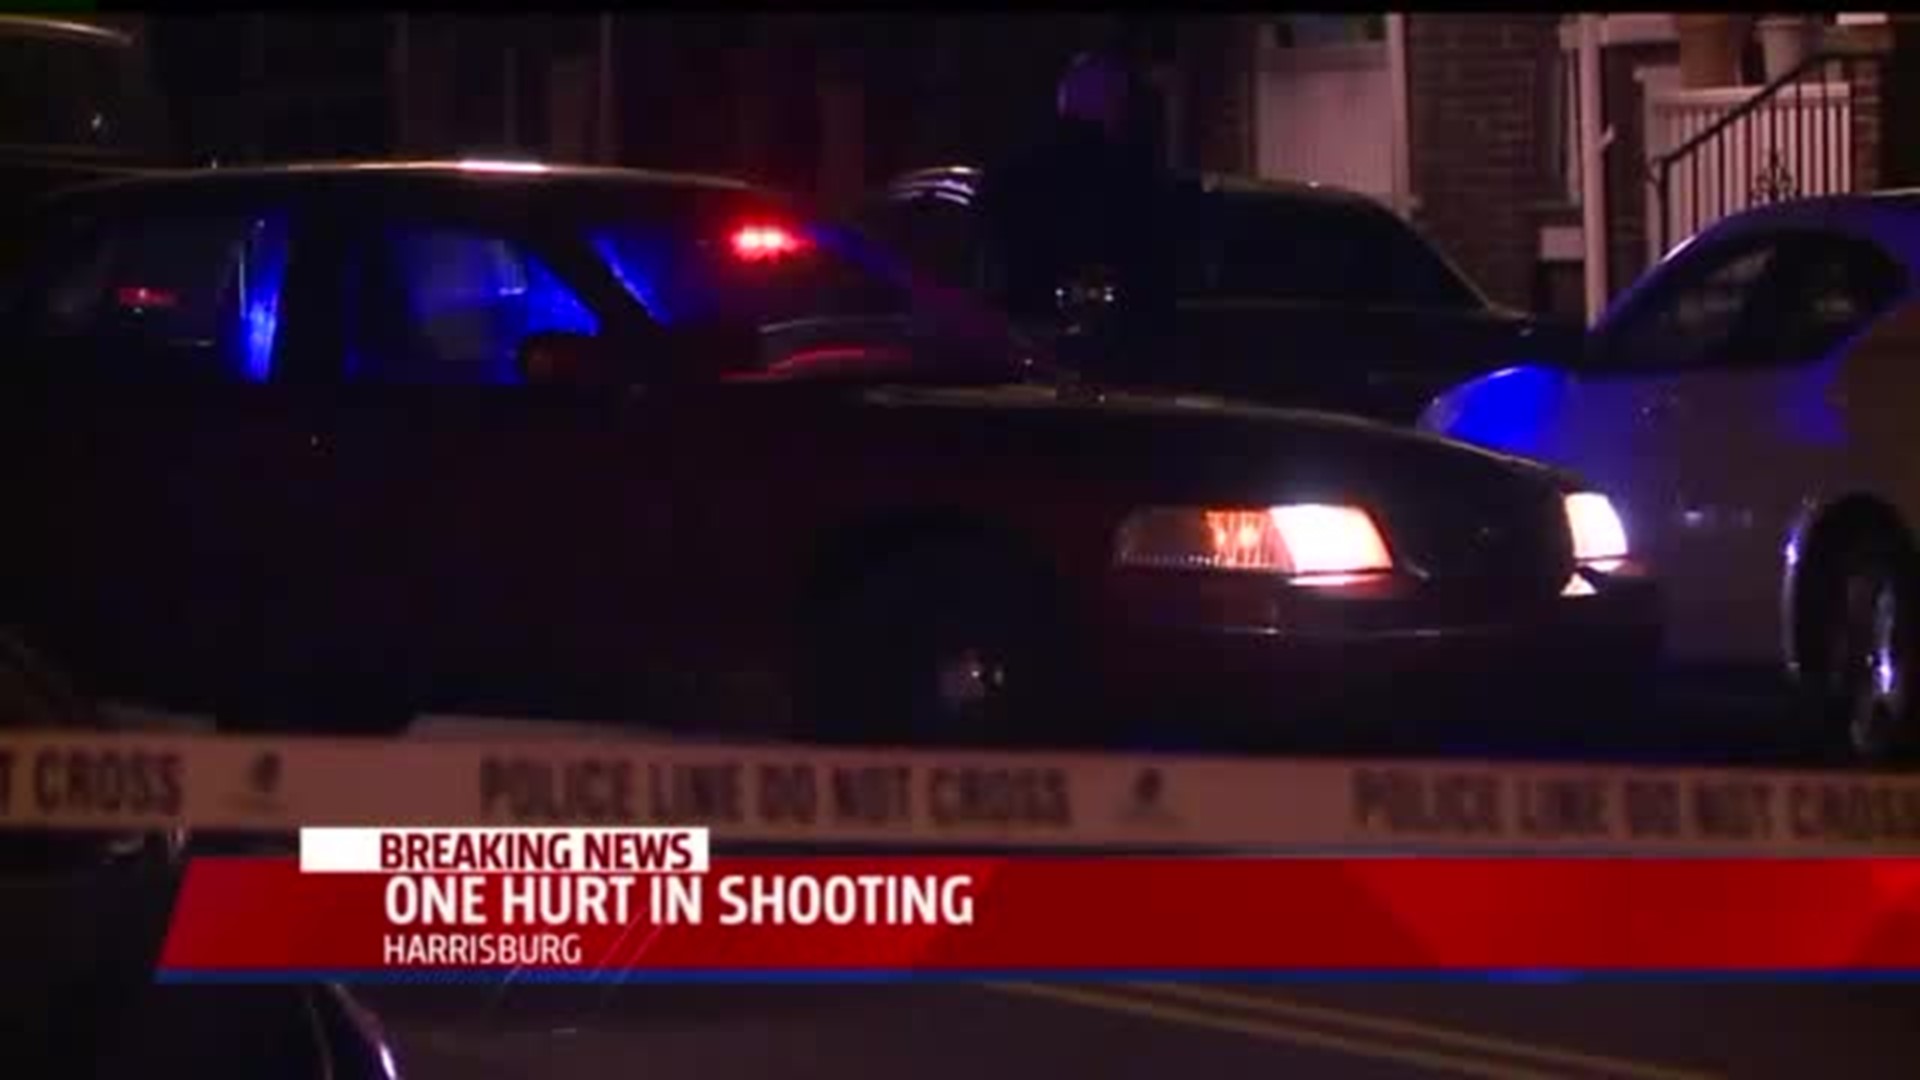 One person hurt in shooting